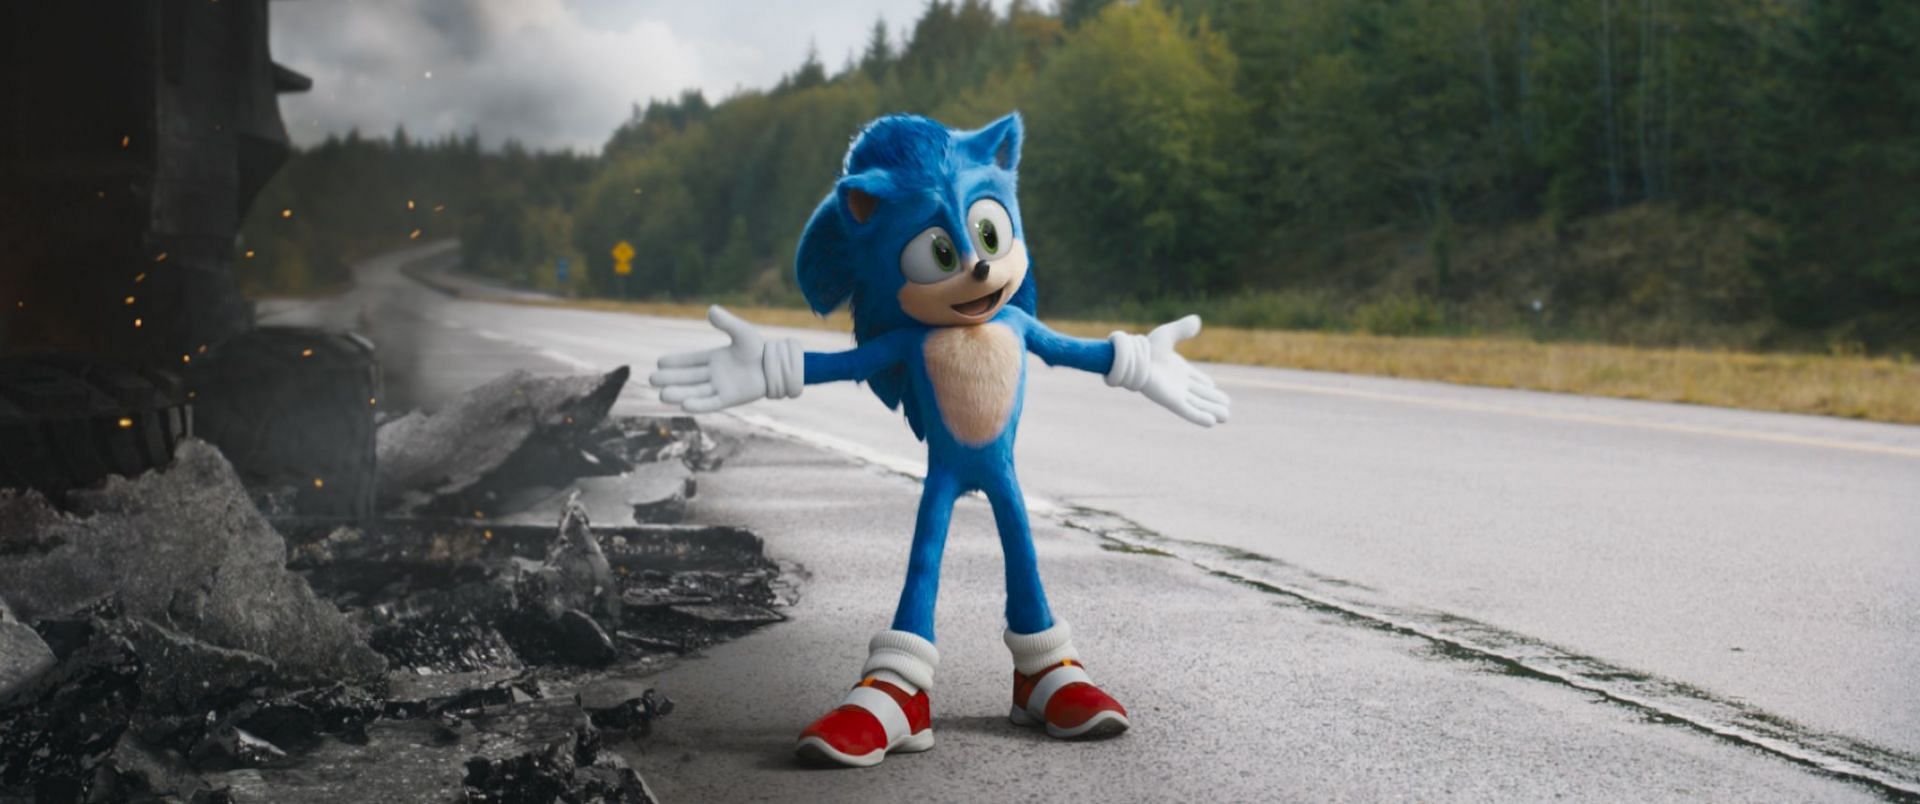 Sonic The Hedgehog 3: Release Date, Cast, And Potential Storyline